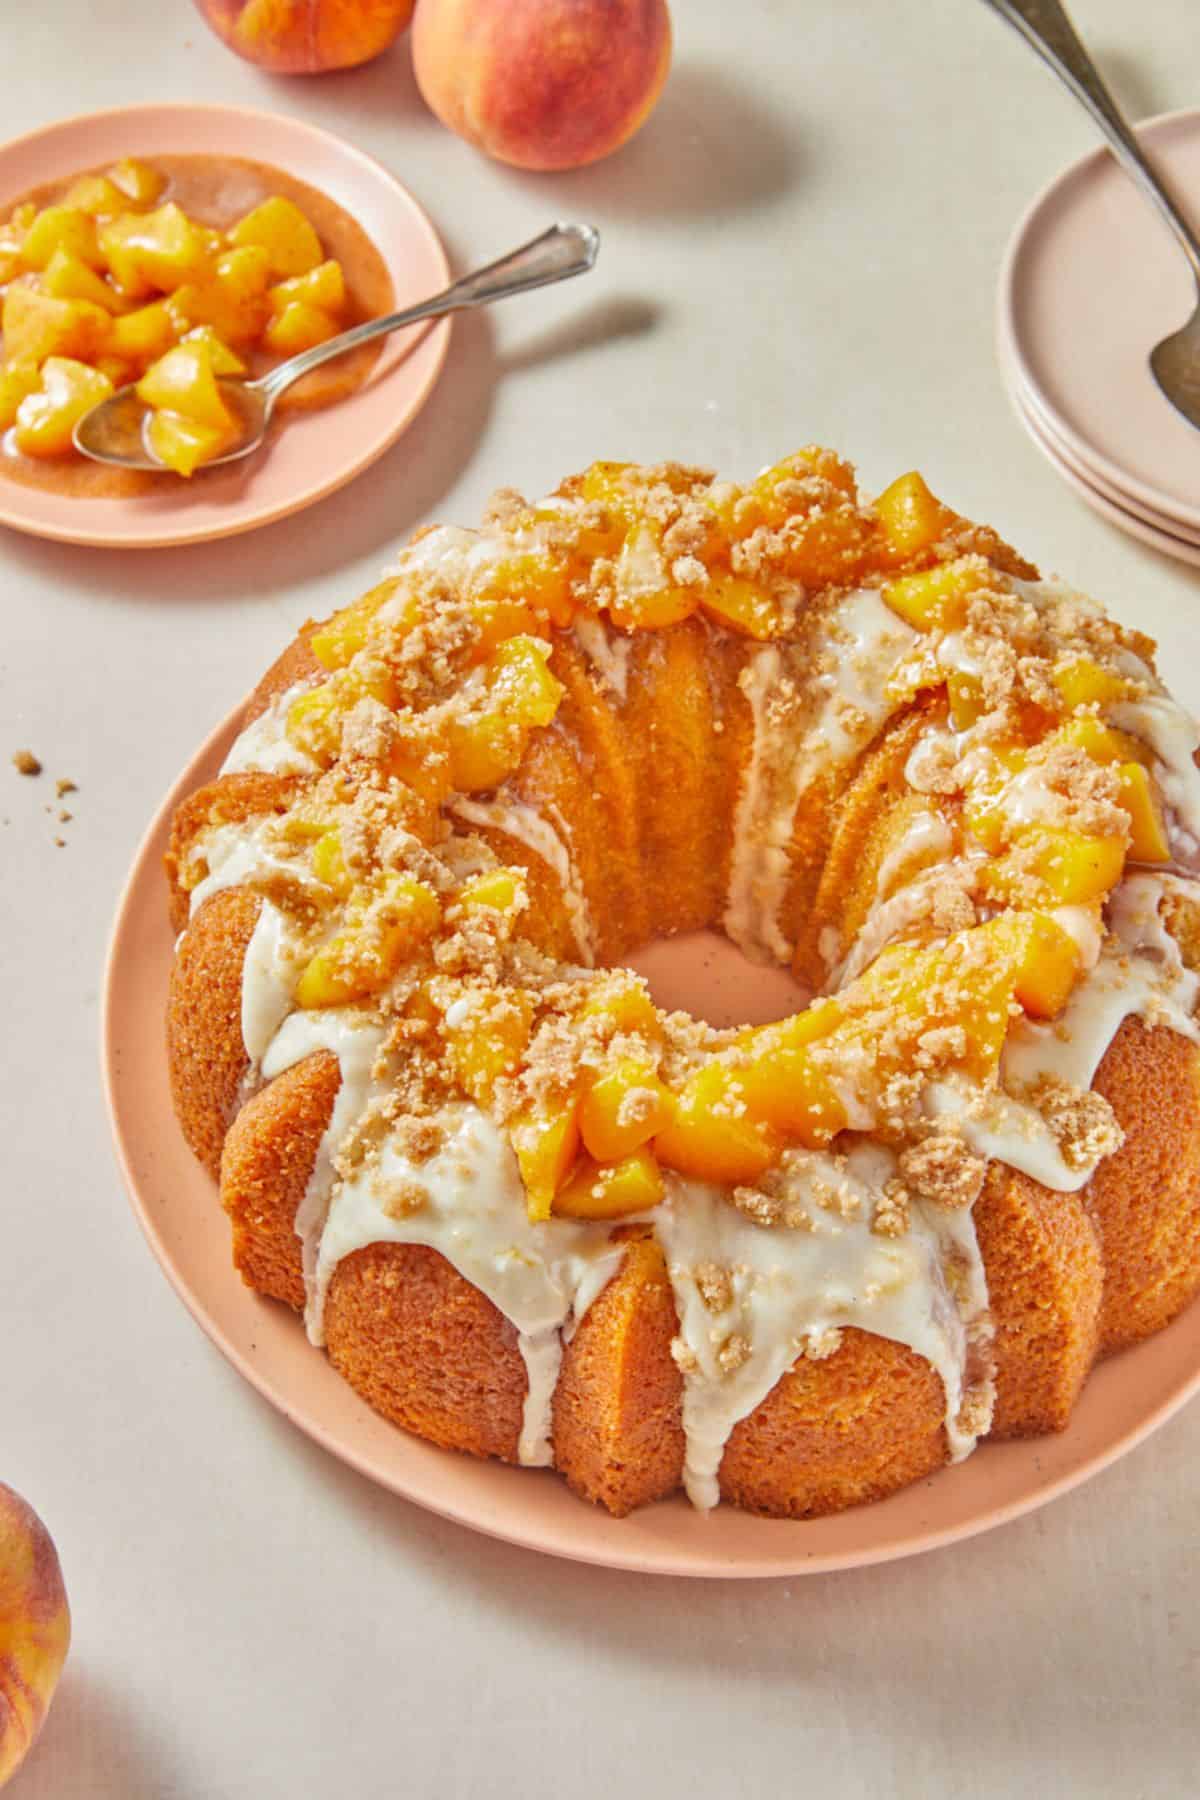 A peach cobbler pound cake drizzled with white glaze and topped with fresh peach pieces and crumble, served on a pink plate, with empty plates, peaches, and a plate with more peach pieces in the background